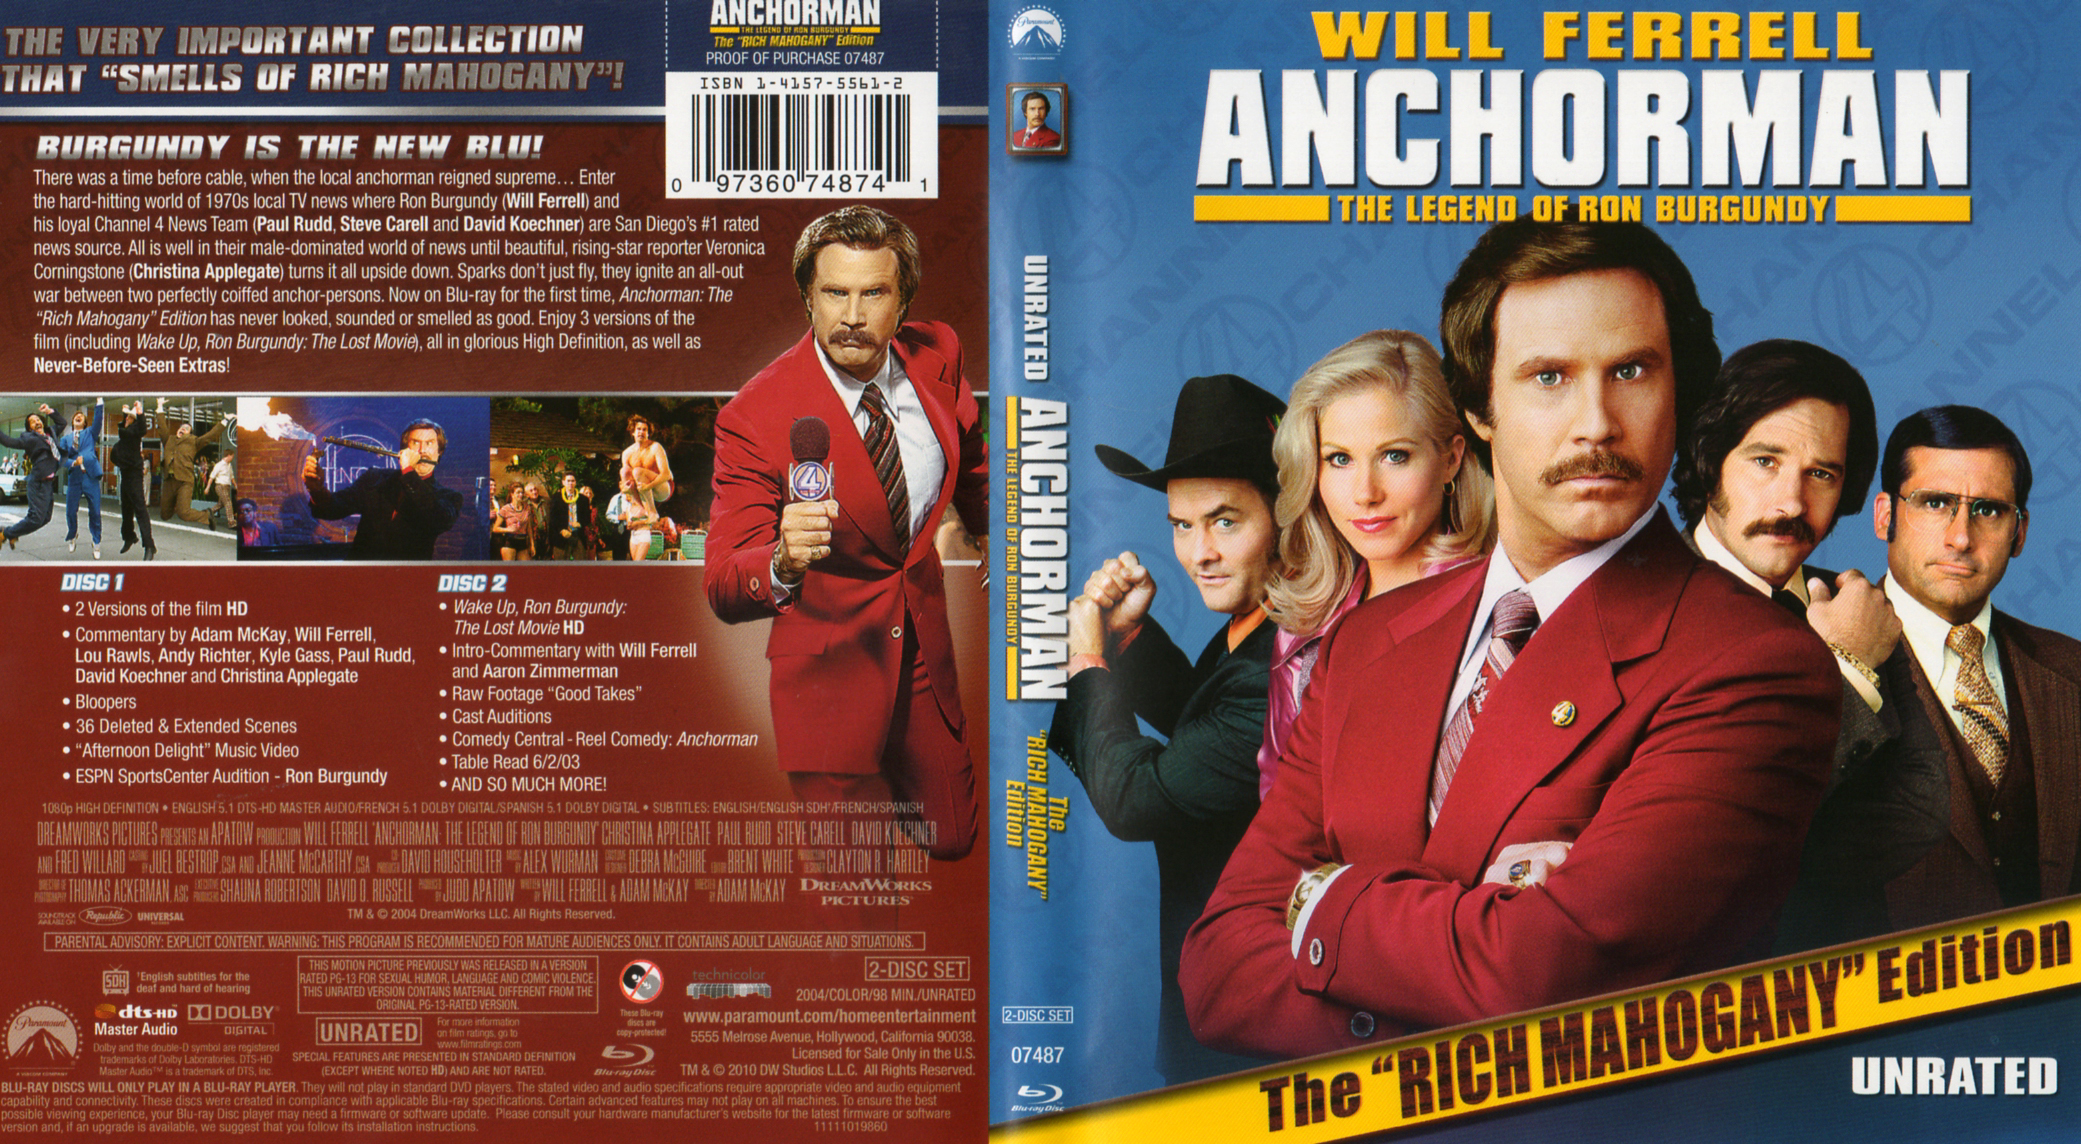 Jaquette DVD Anchorman Zone 1 (BLU-RAY)